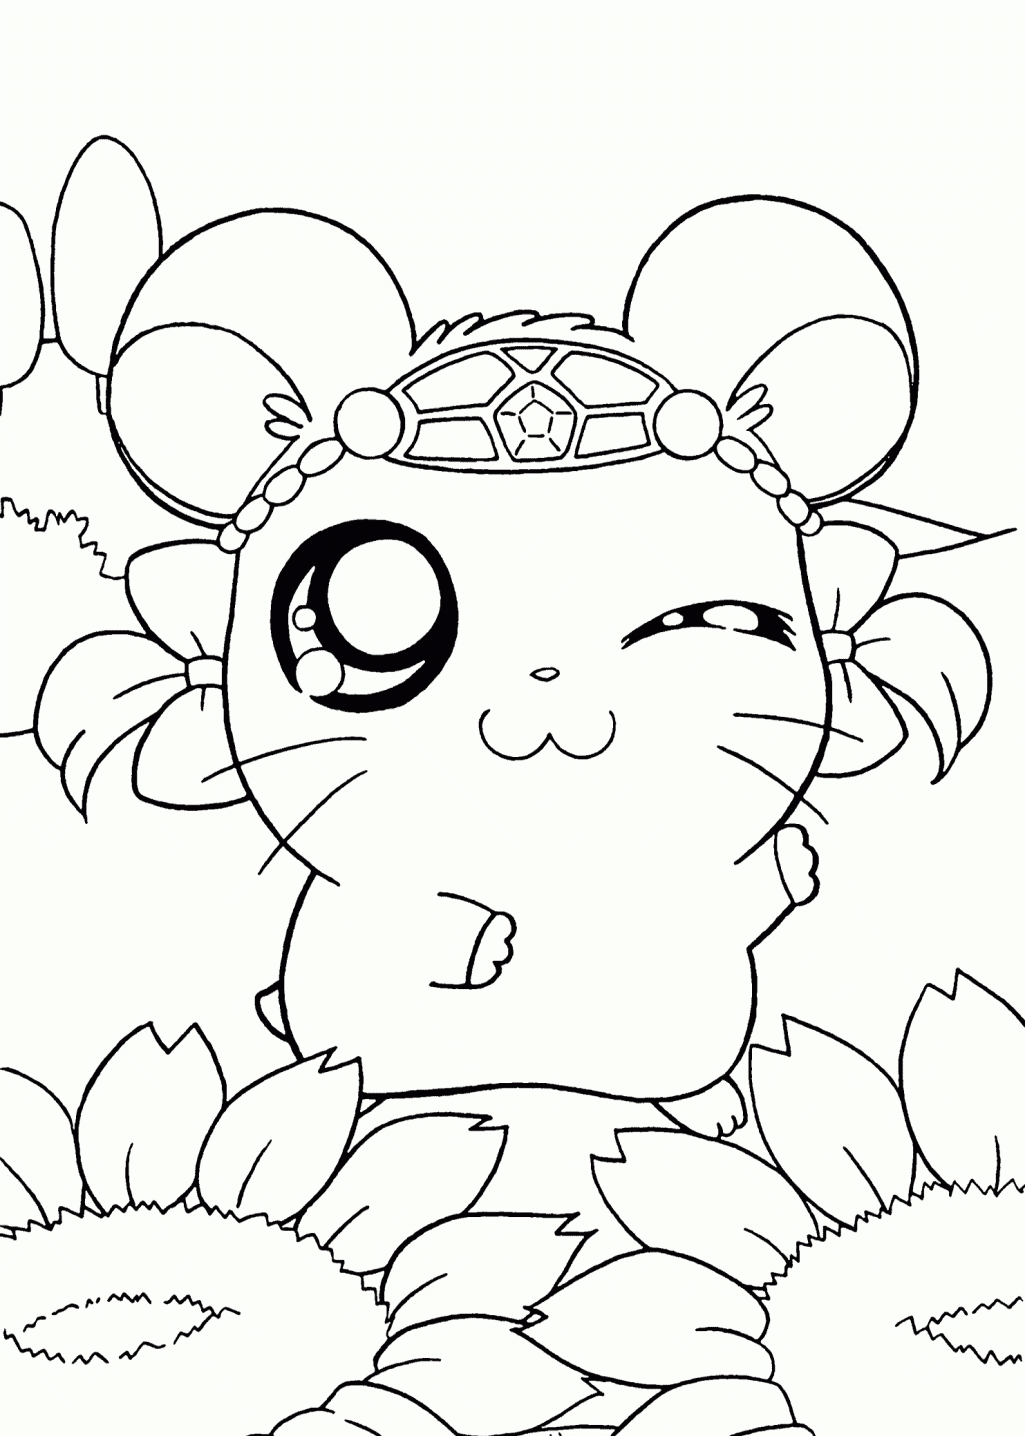 Anime Animals Coloring Pages   Coloring Home